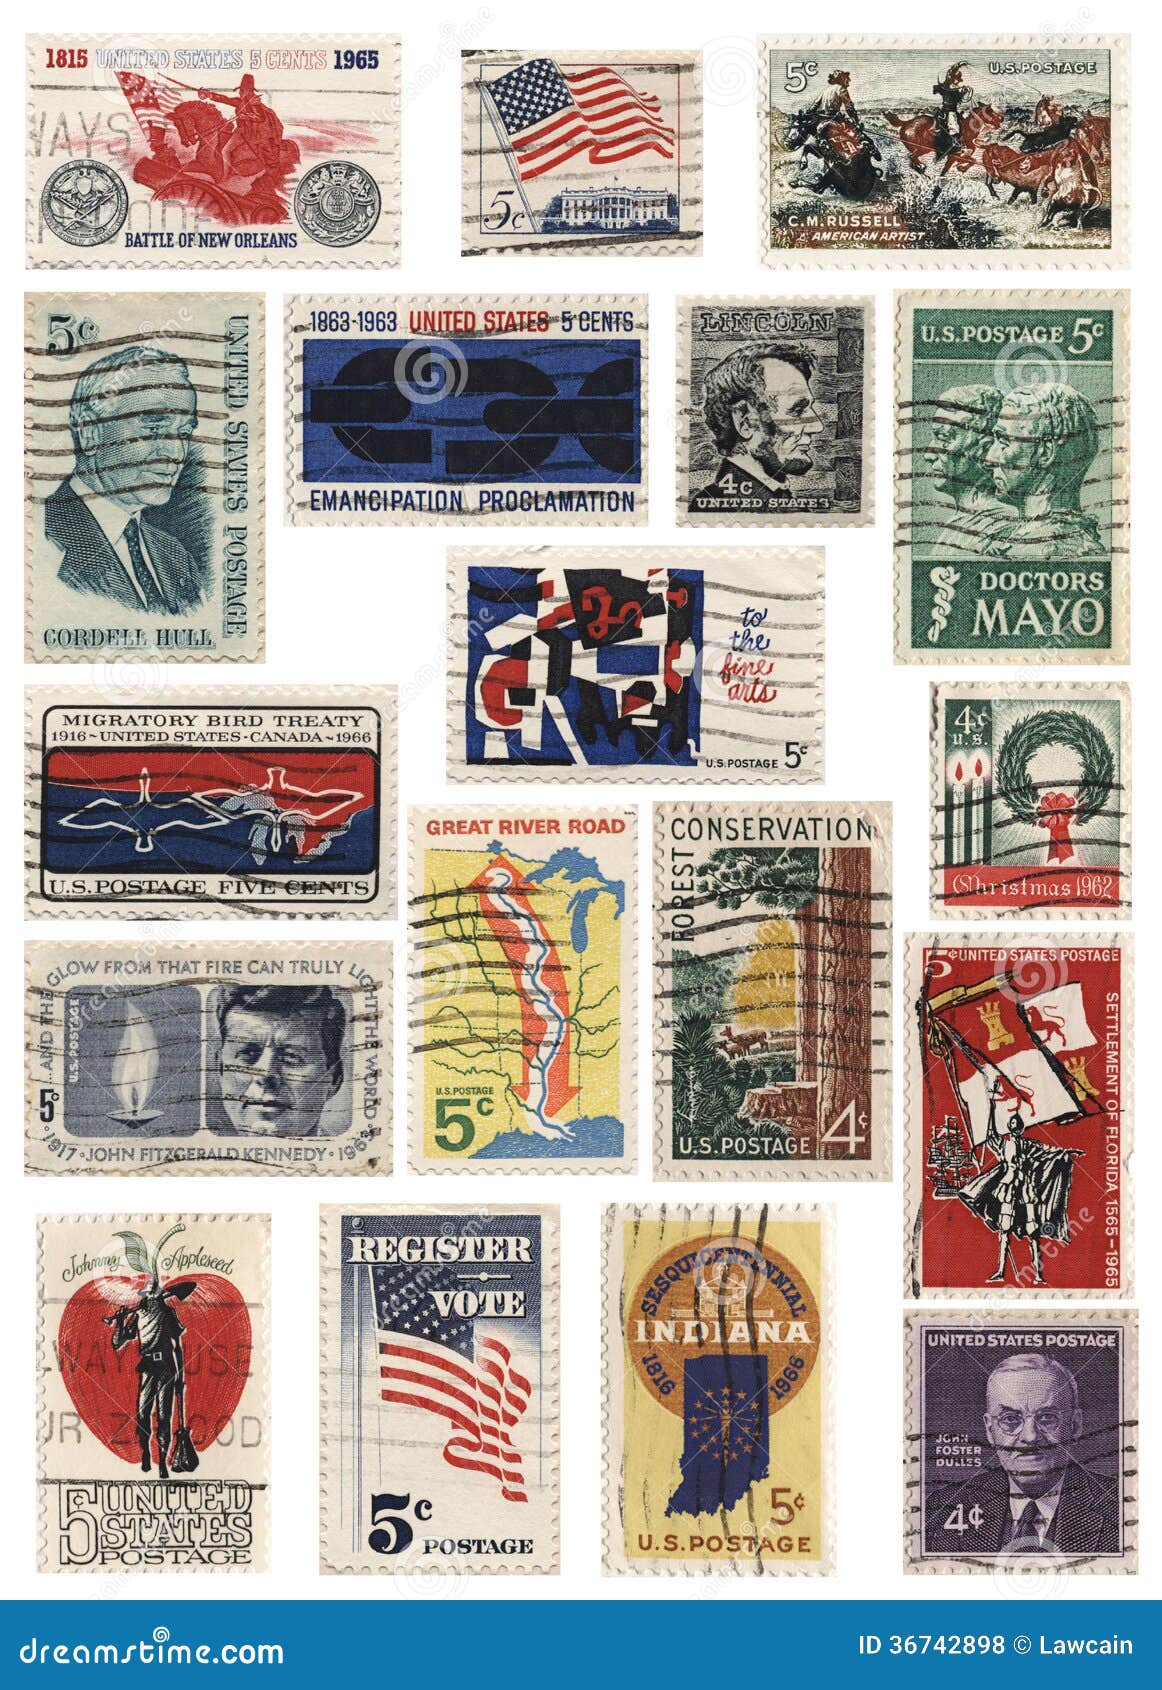 USA 1960s Stamp Collage editorial stock photo. Image of hull - 36742898